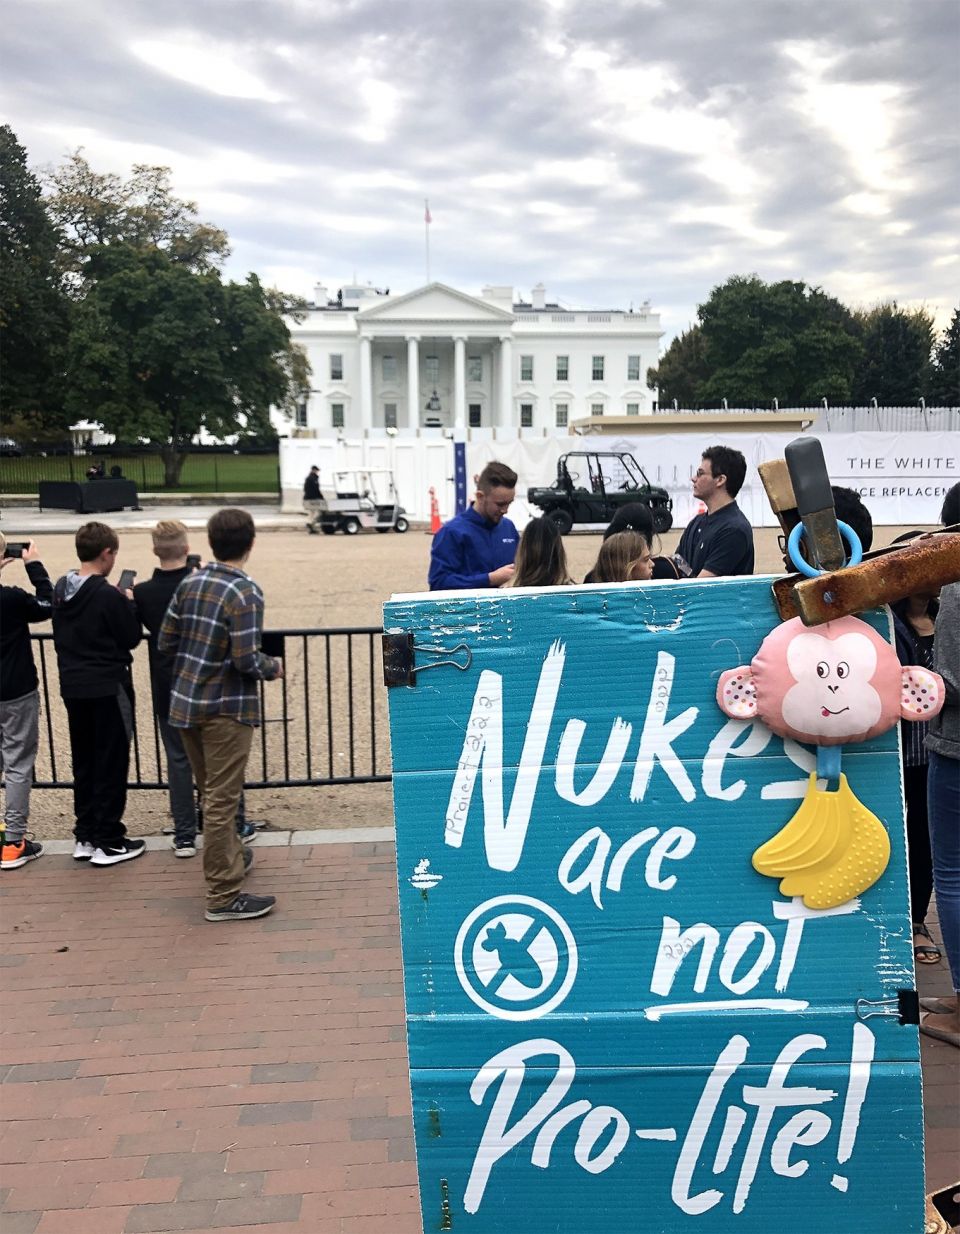 A sign denouncing nuclear weapons is seen near the White House in Washington Oct. 25, 2019. (CNS photo/Tyler Orsburn)